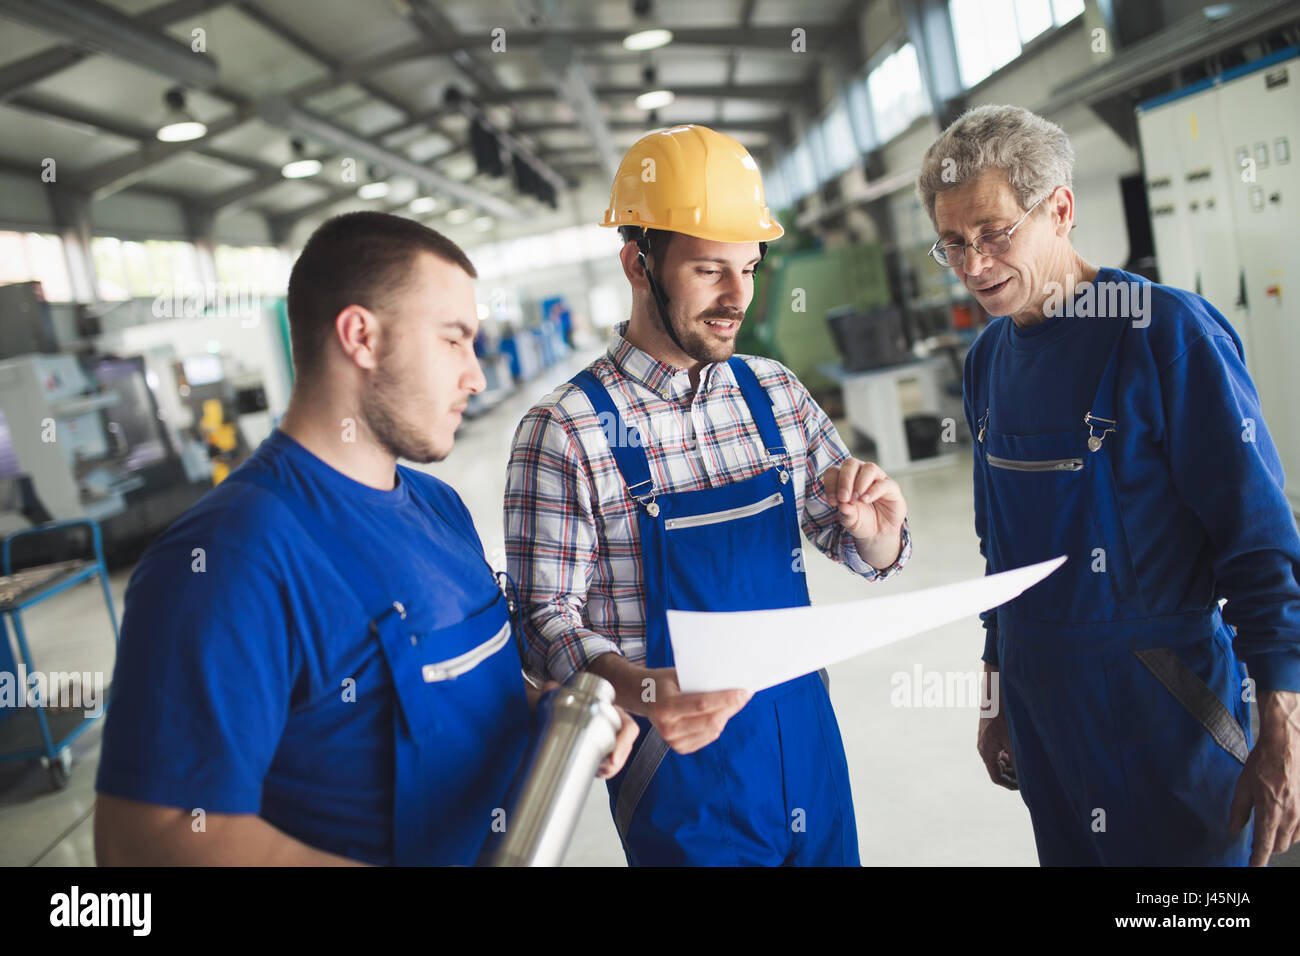 Mechanical and metal industry engineers working in factory Stock Photo